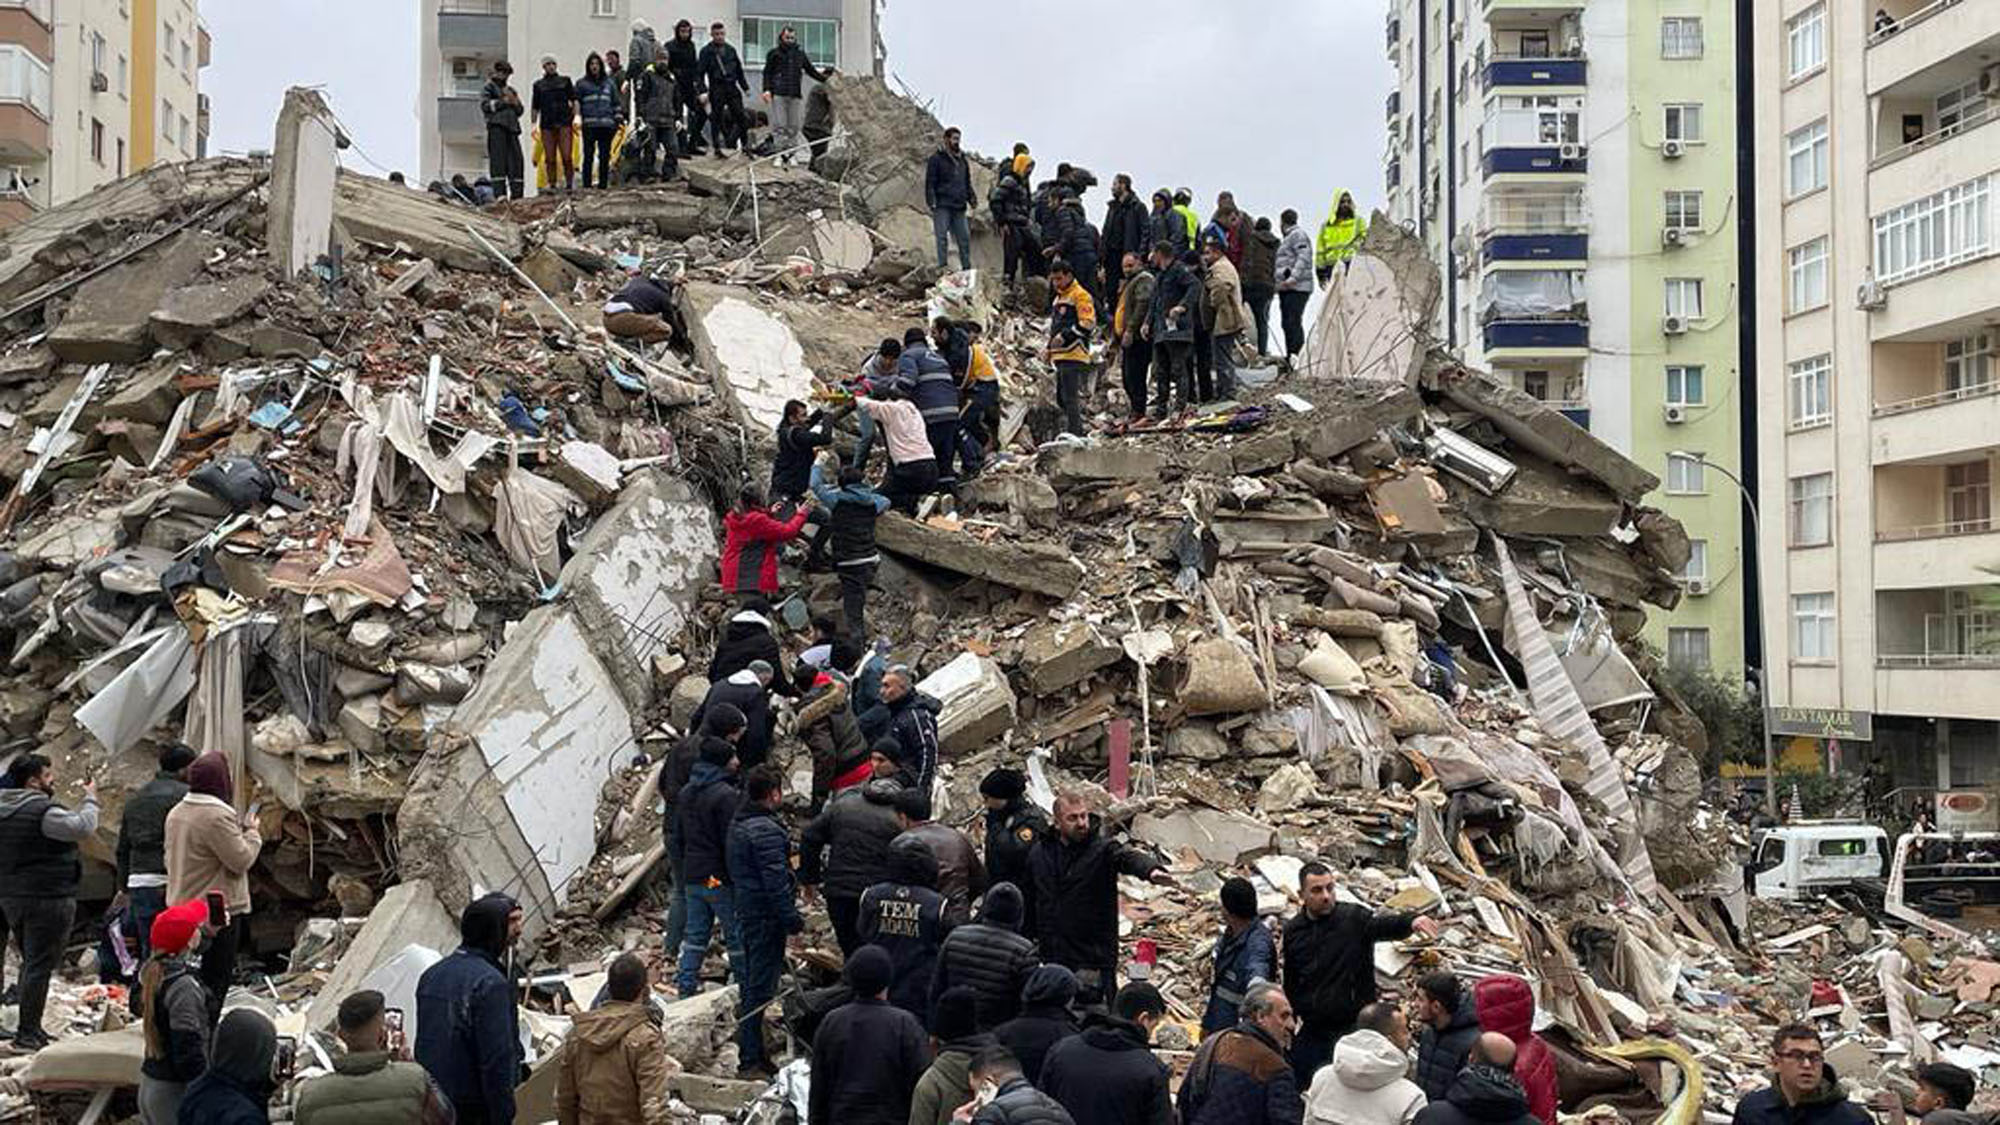 Early Photos From the Earthquake in Turkey and Syria - The Atlantic